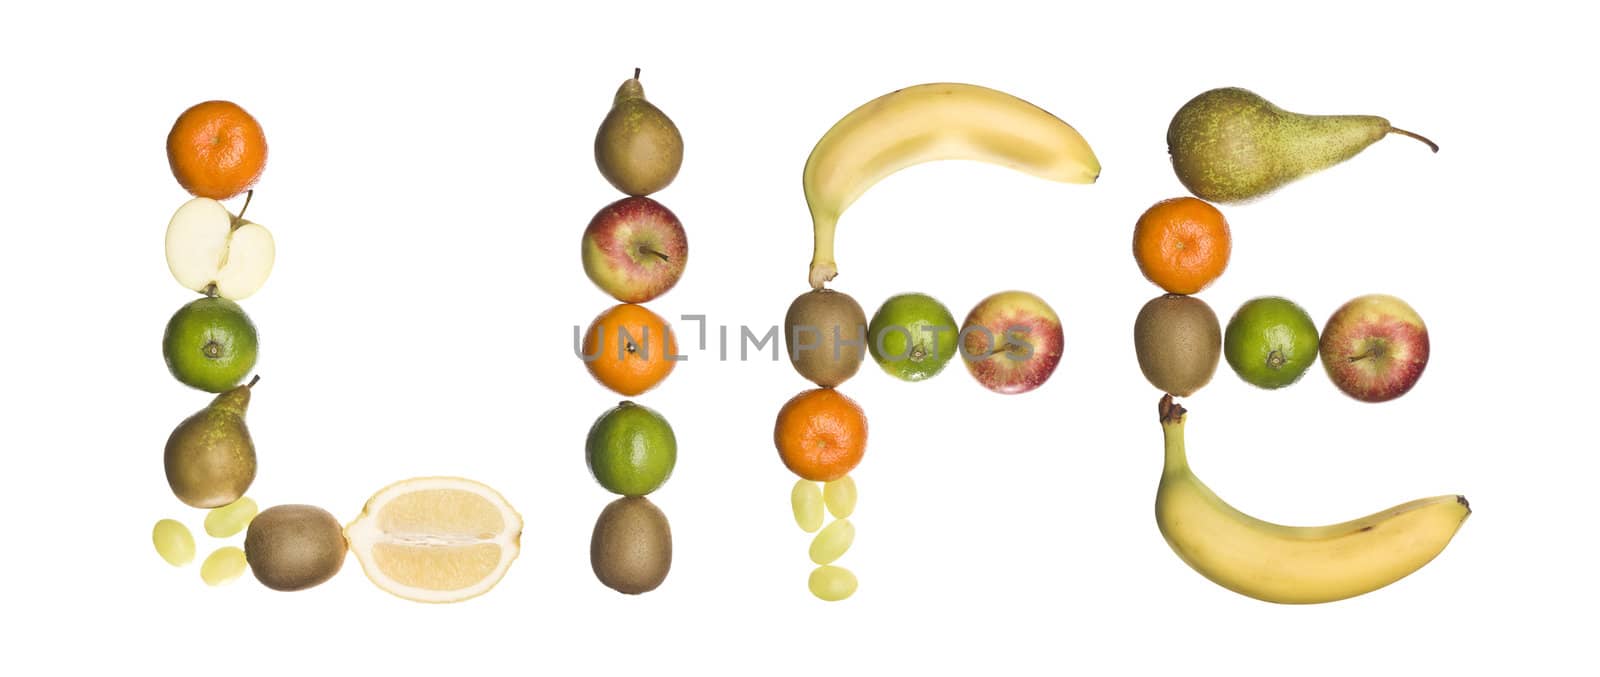 The word 'Life' made out of fruit isolated on a white background